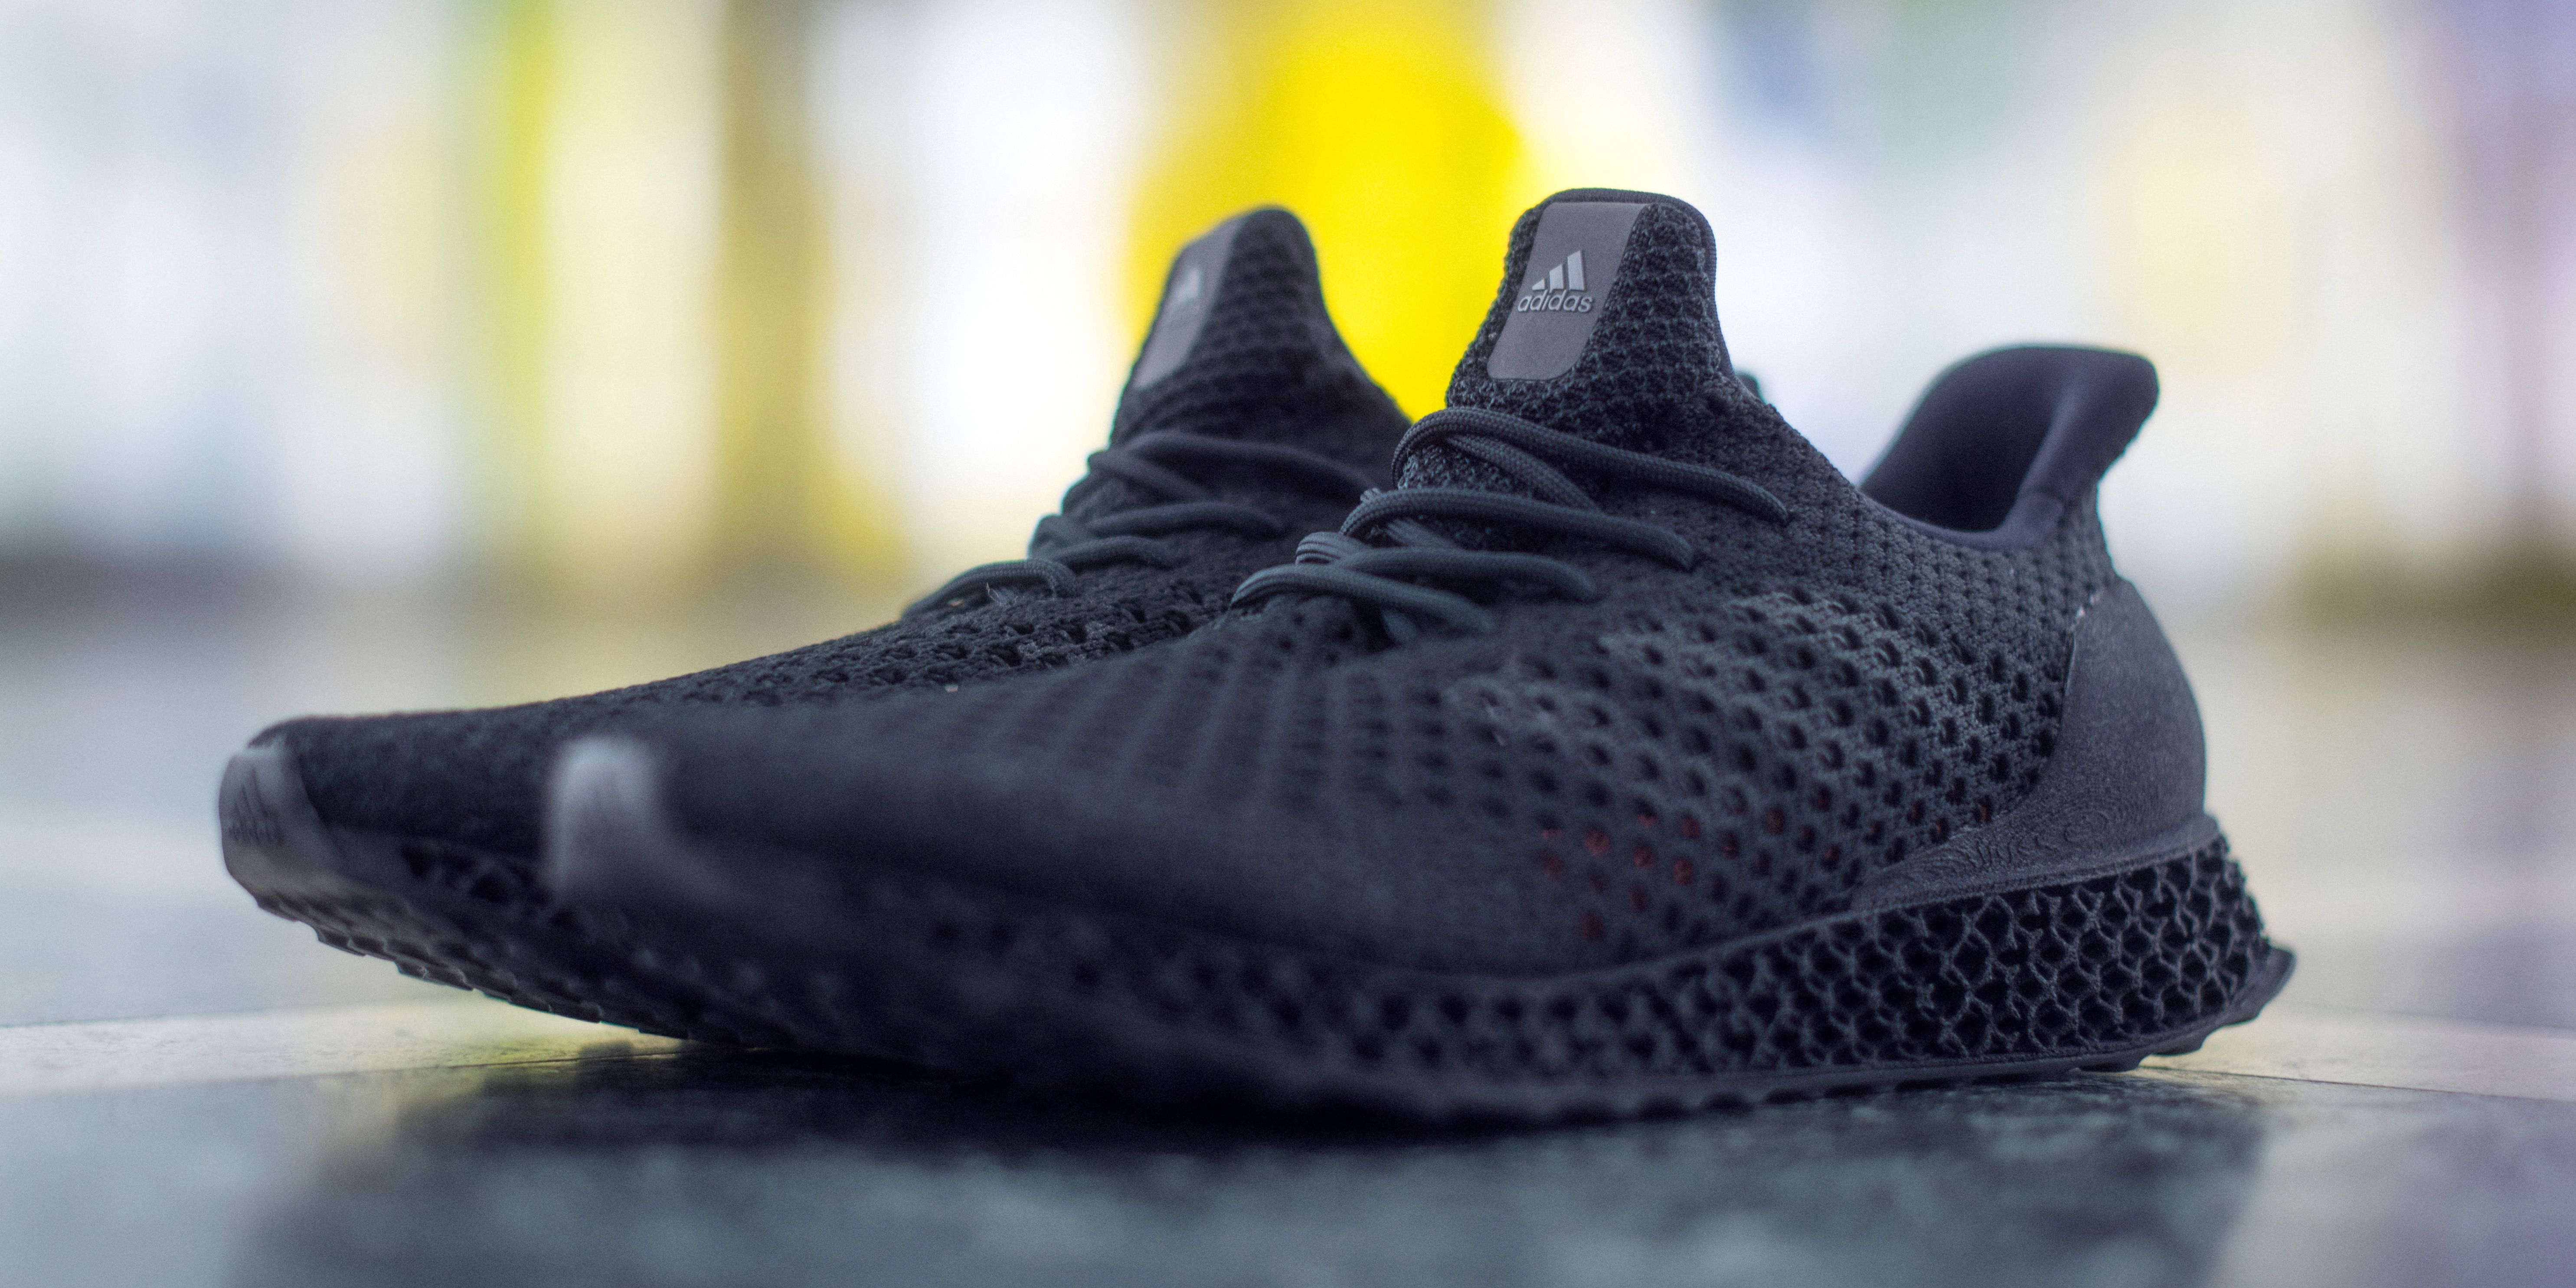 Productiecentrum tuberculose rooster Where to Buy Adidas' New 3D Runner - Adidas Is Releasing a 3D-Printed  Sneaker